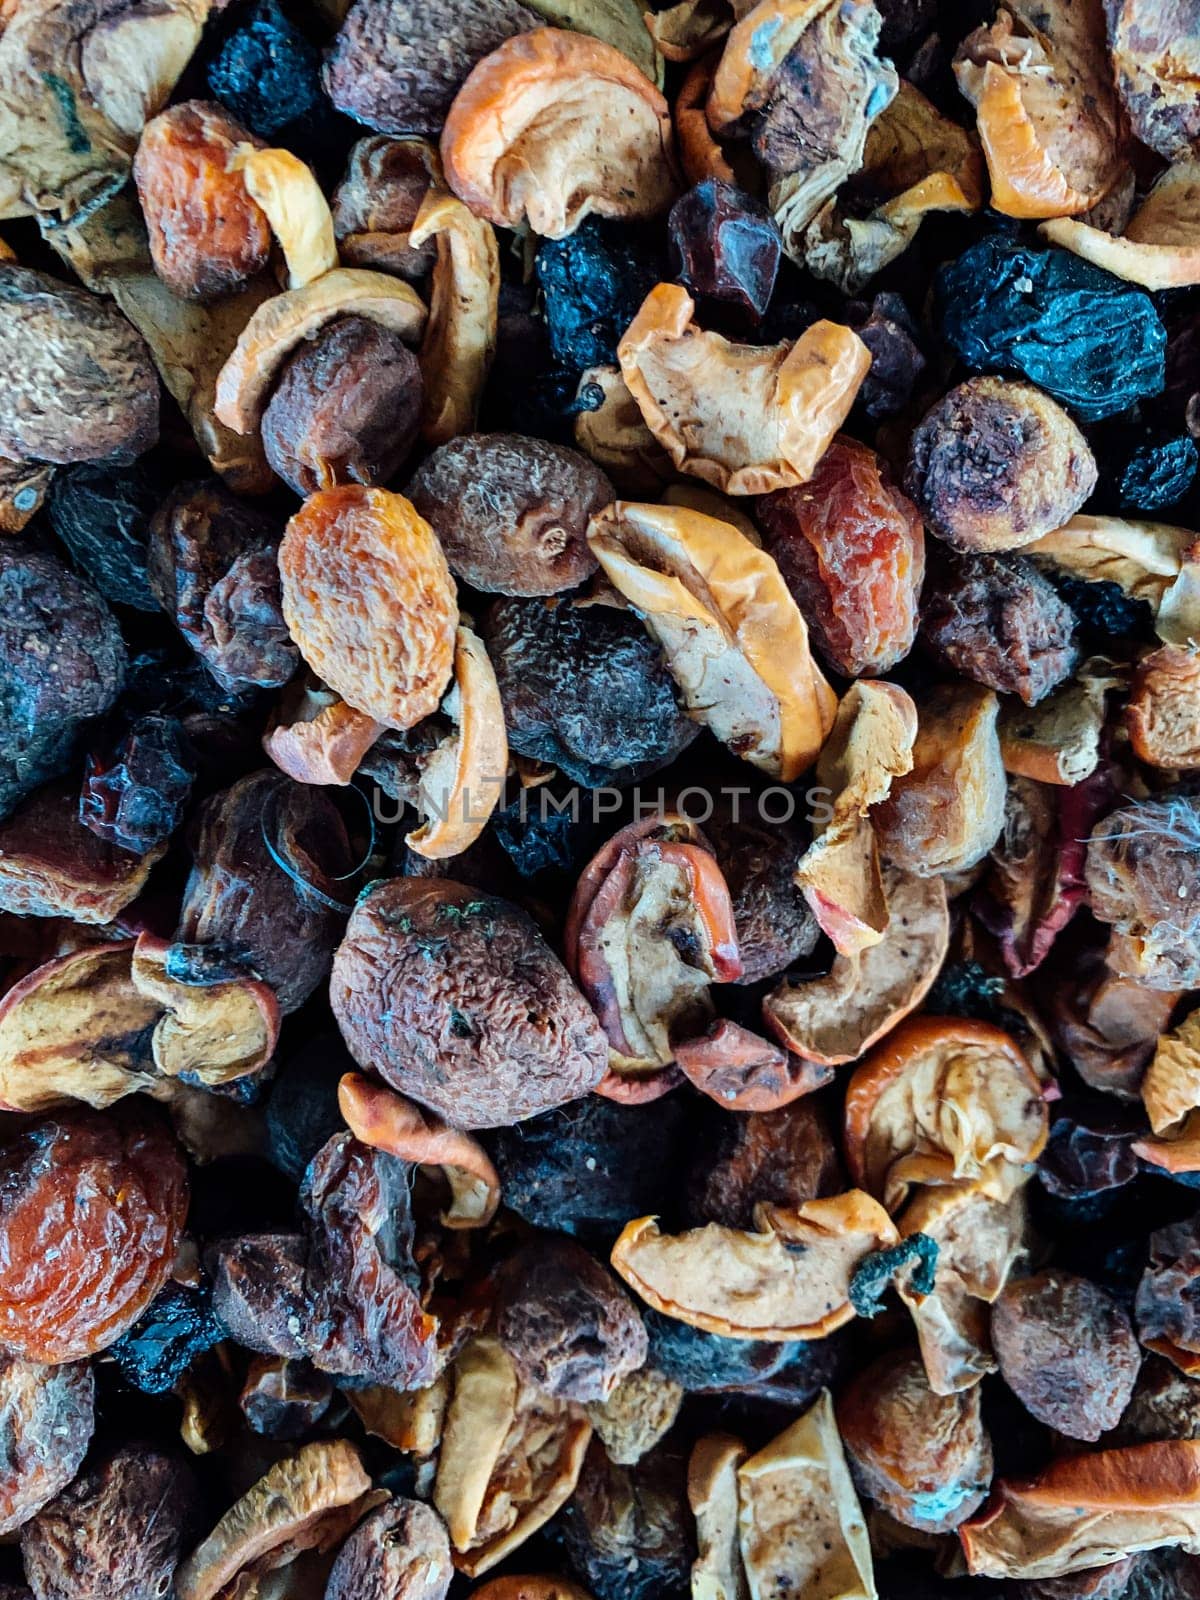 lots of dried fruit for eating dried fruits like background by Simakov